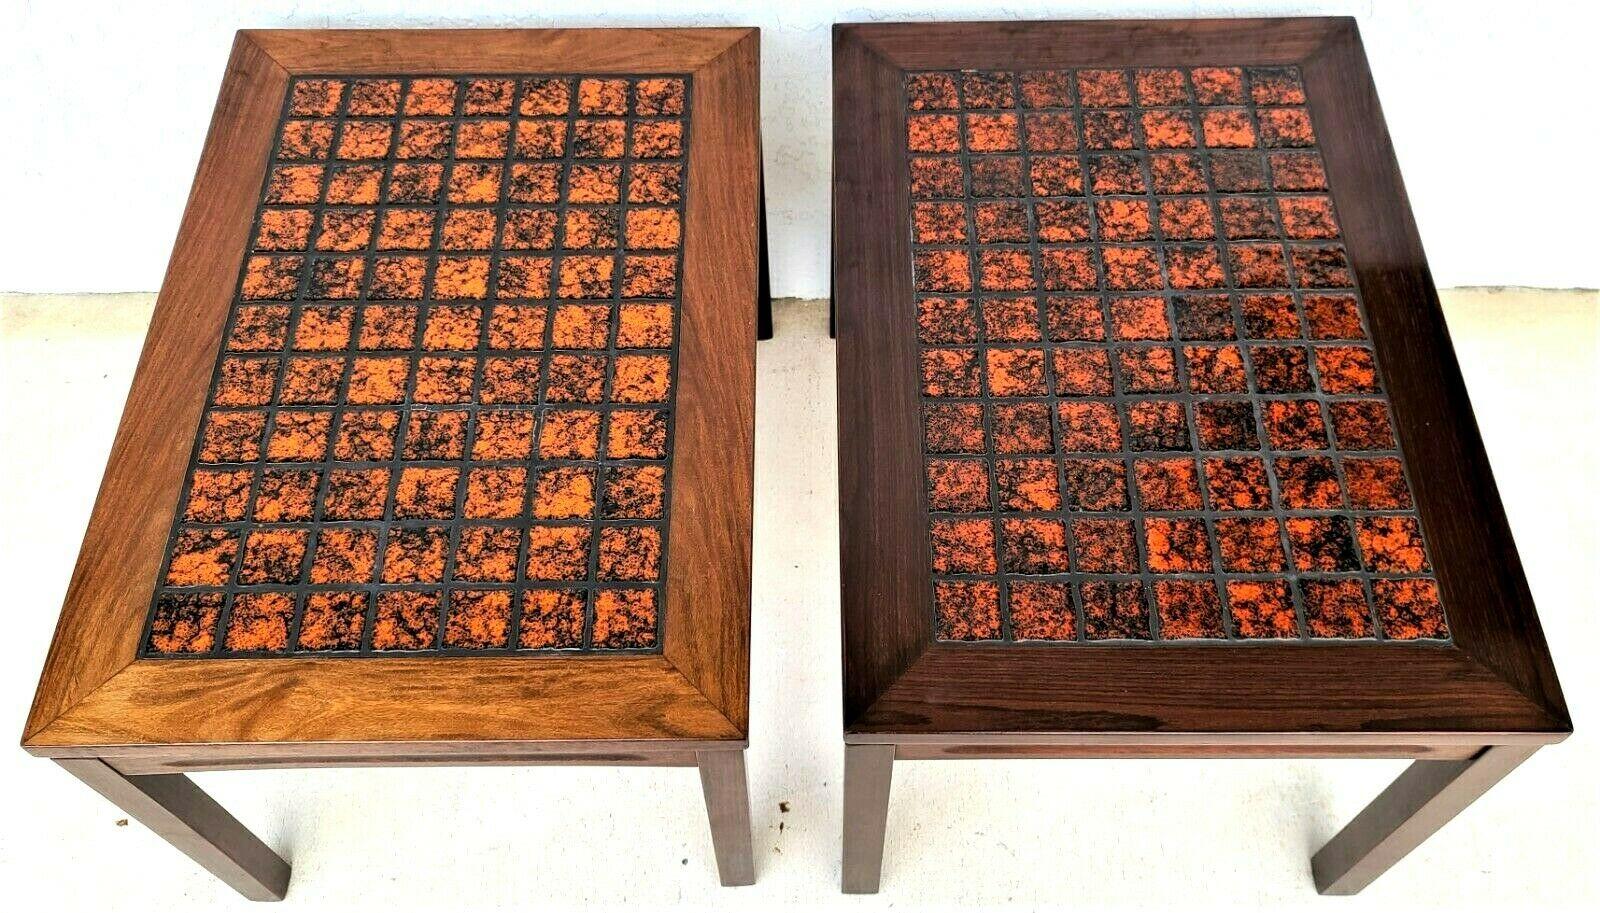 For FULL item description be sure to click on CONTINUE READING at the bottom of this listing.

Offering One Of Our Recent Palm Beach Estate Fine Furniture Acquisitions Of A Pair of Danish Modern Rosewood Mottled Fire Orange Tile Top Side End